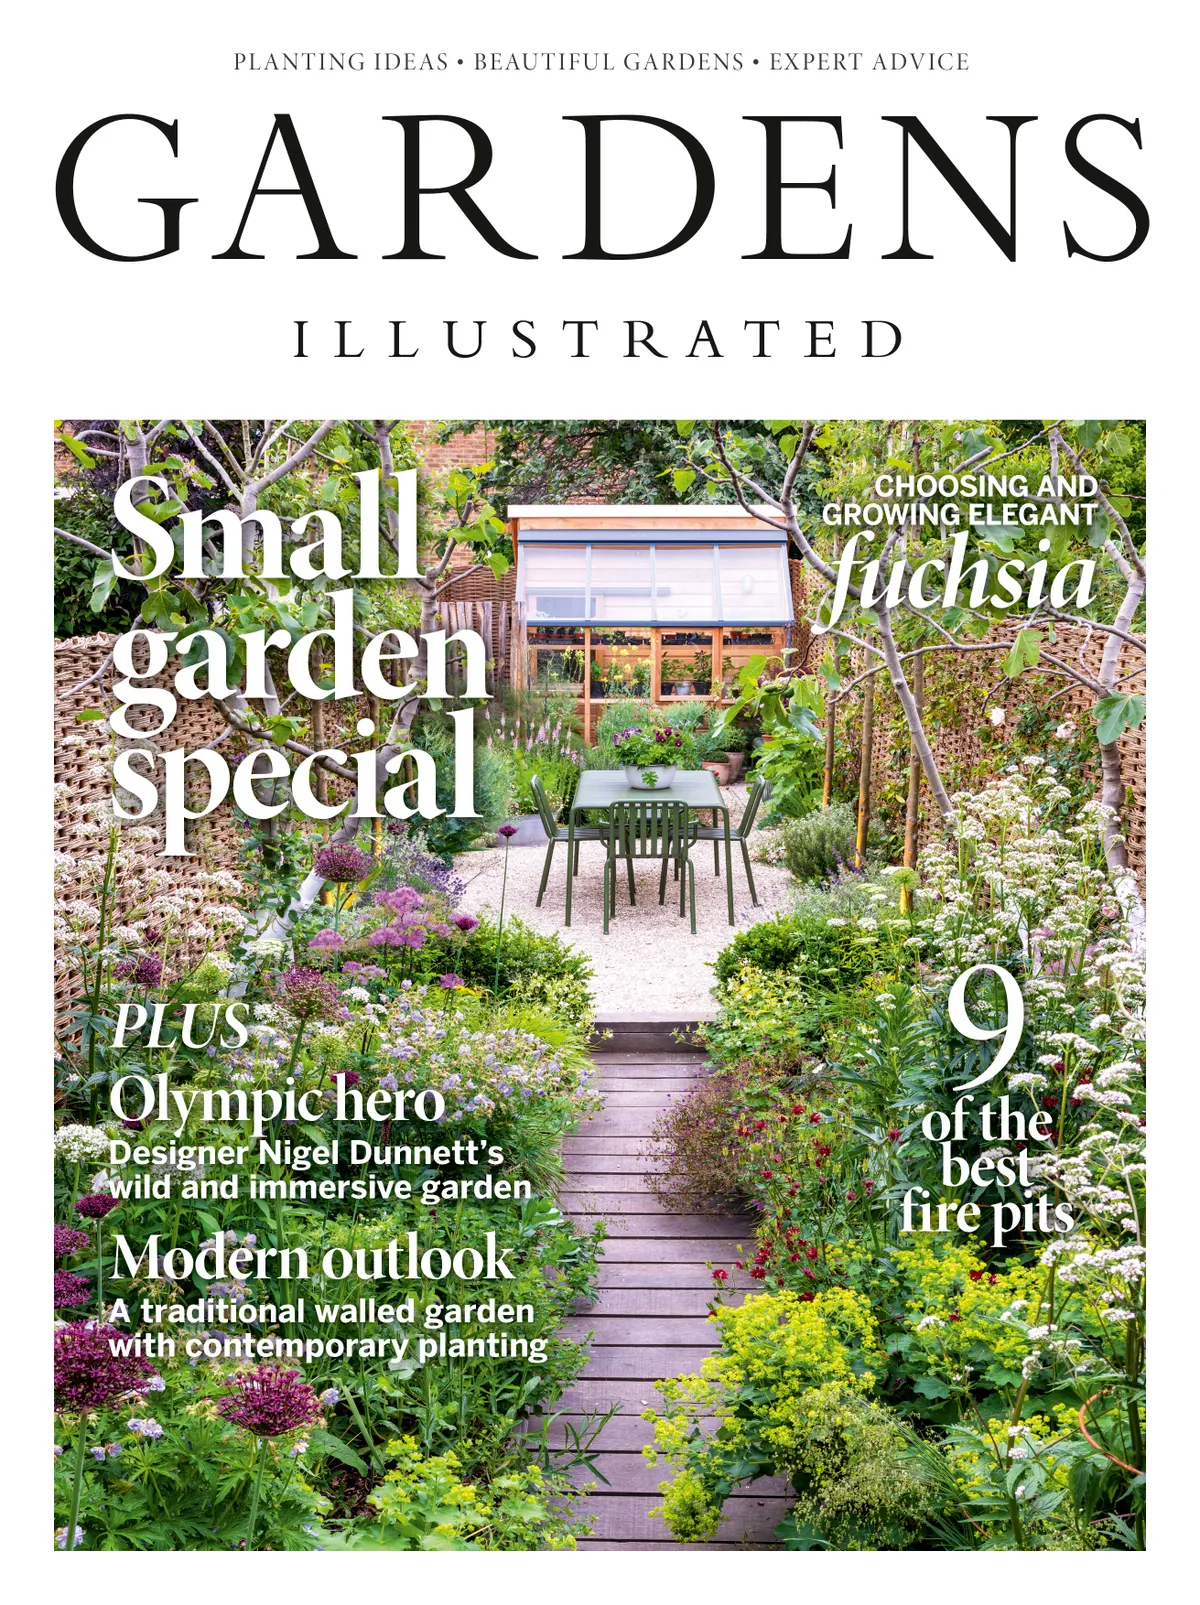 Gardens Illustrated issue 276